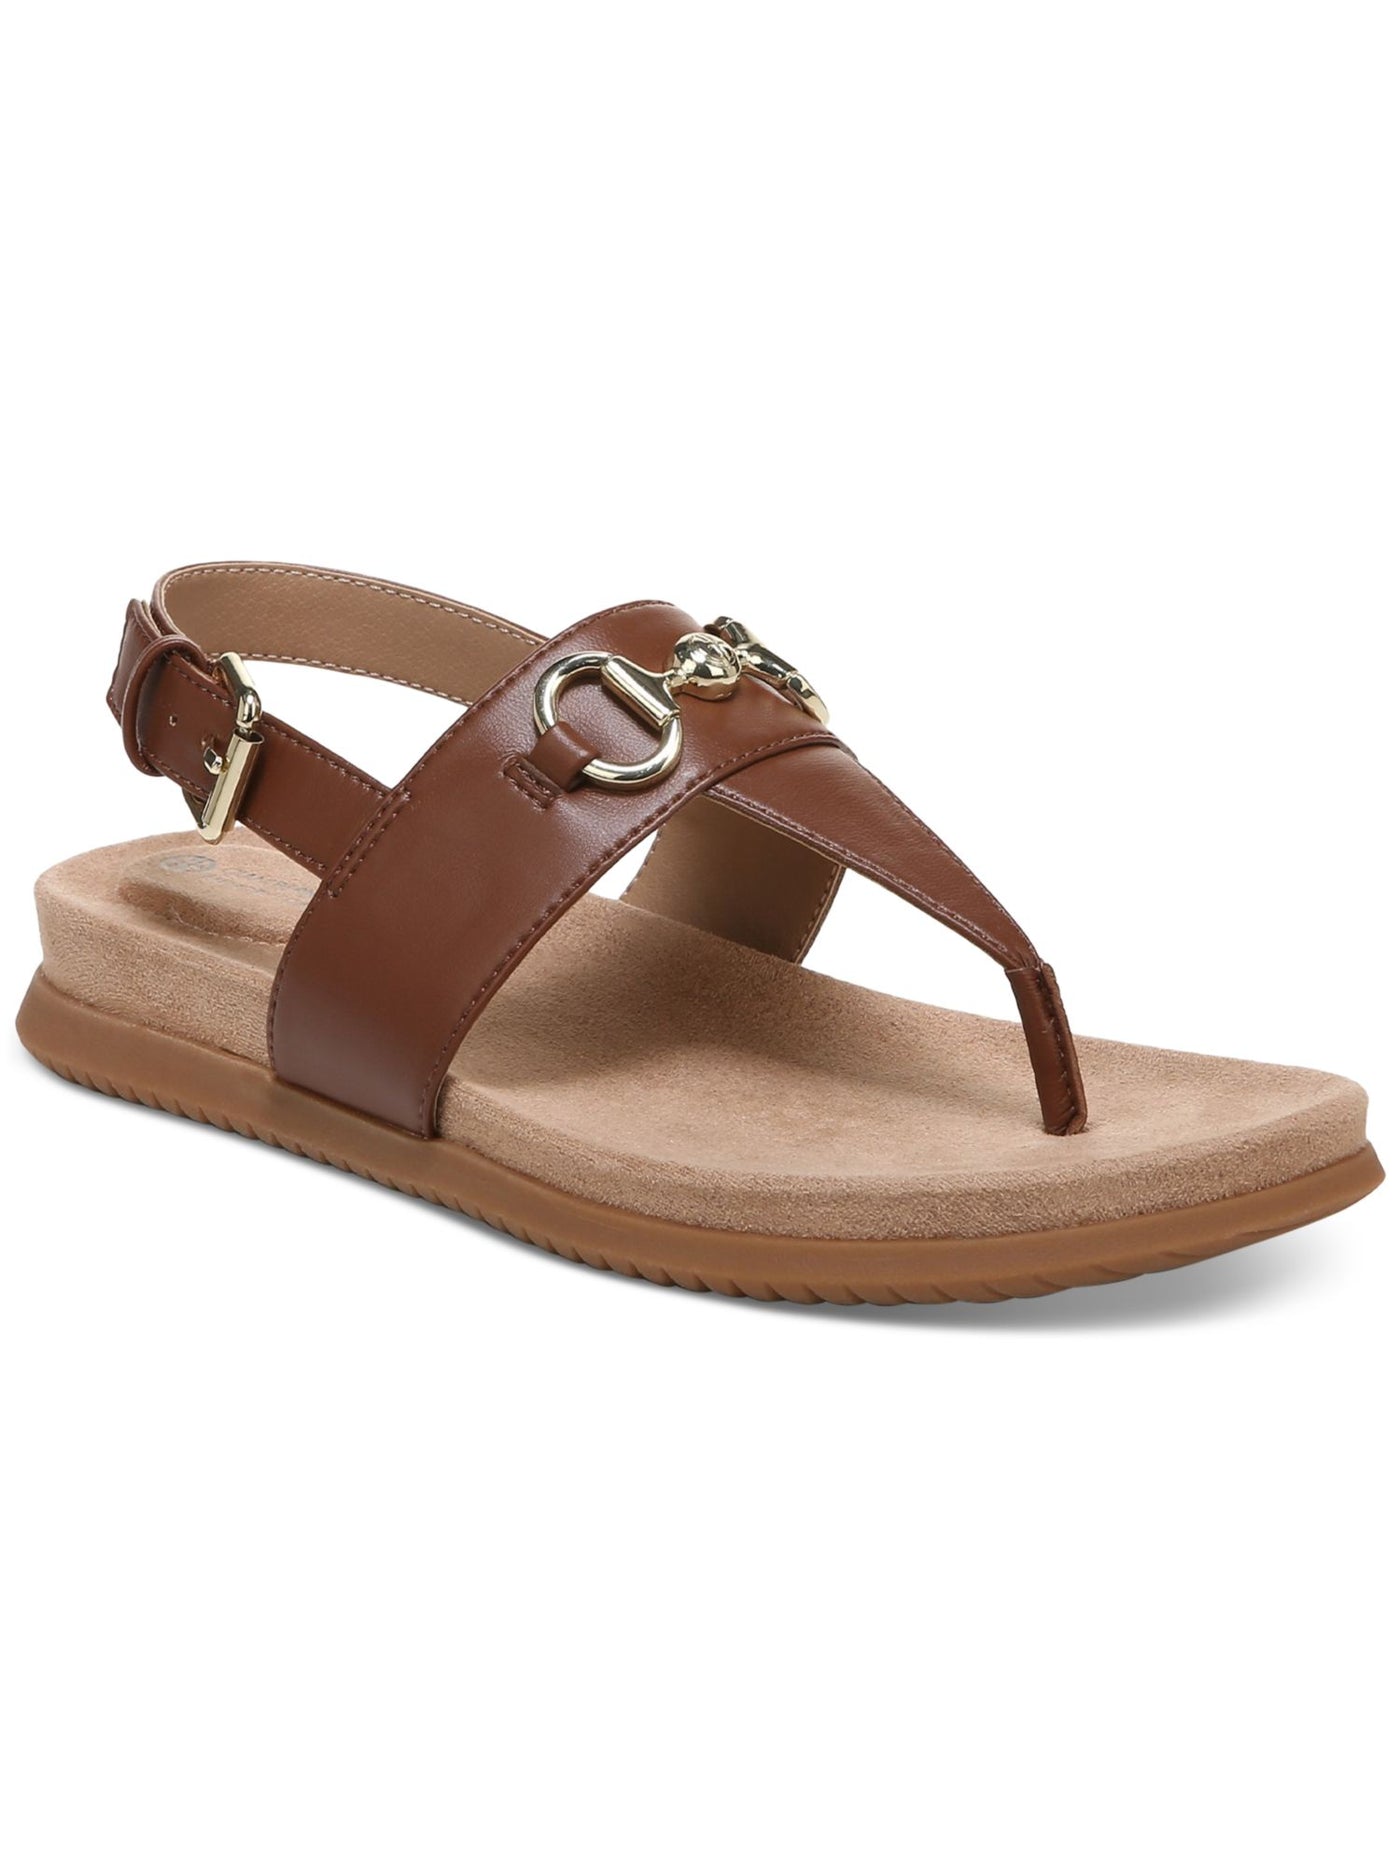 GIANI BERNINI Womens Brown Cushioned Buckle Accent Cynthiaa Round Toe Wedge Buckle Thong Sandals Shoes 7.5 M